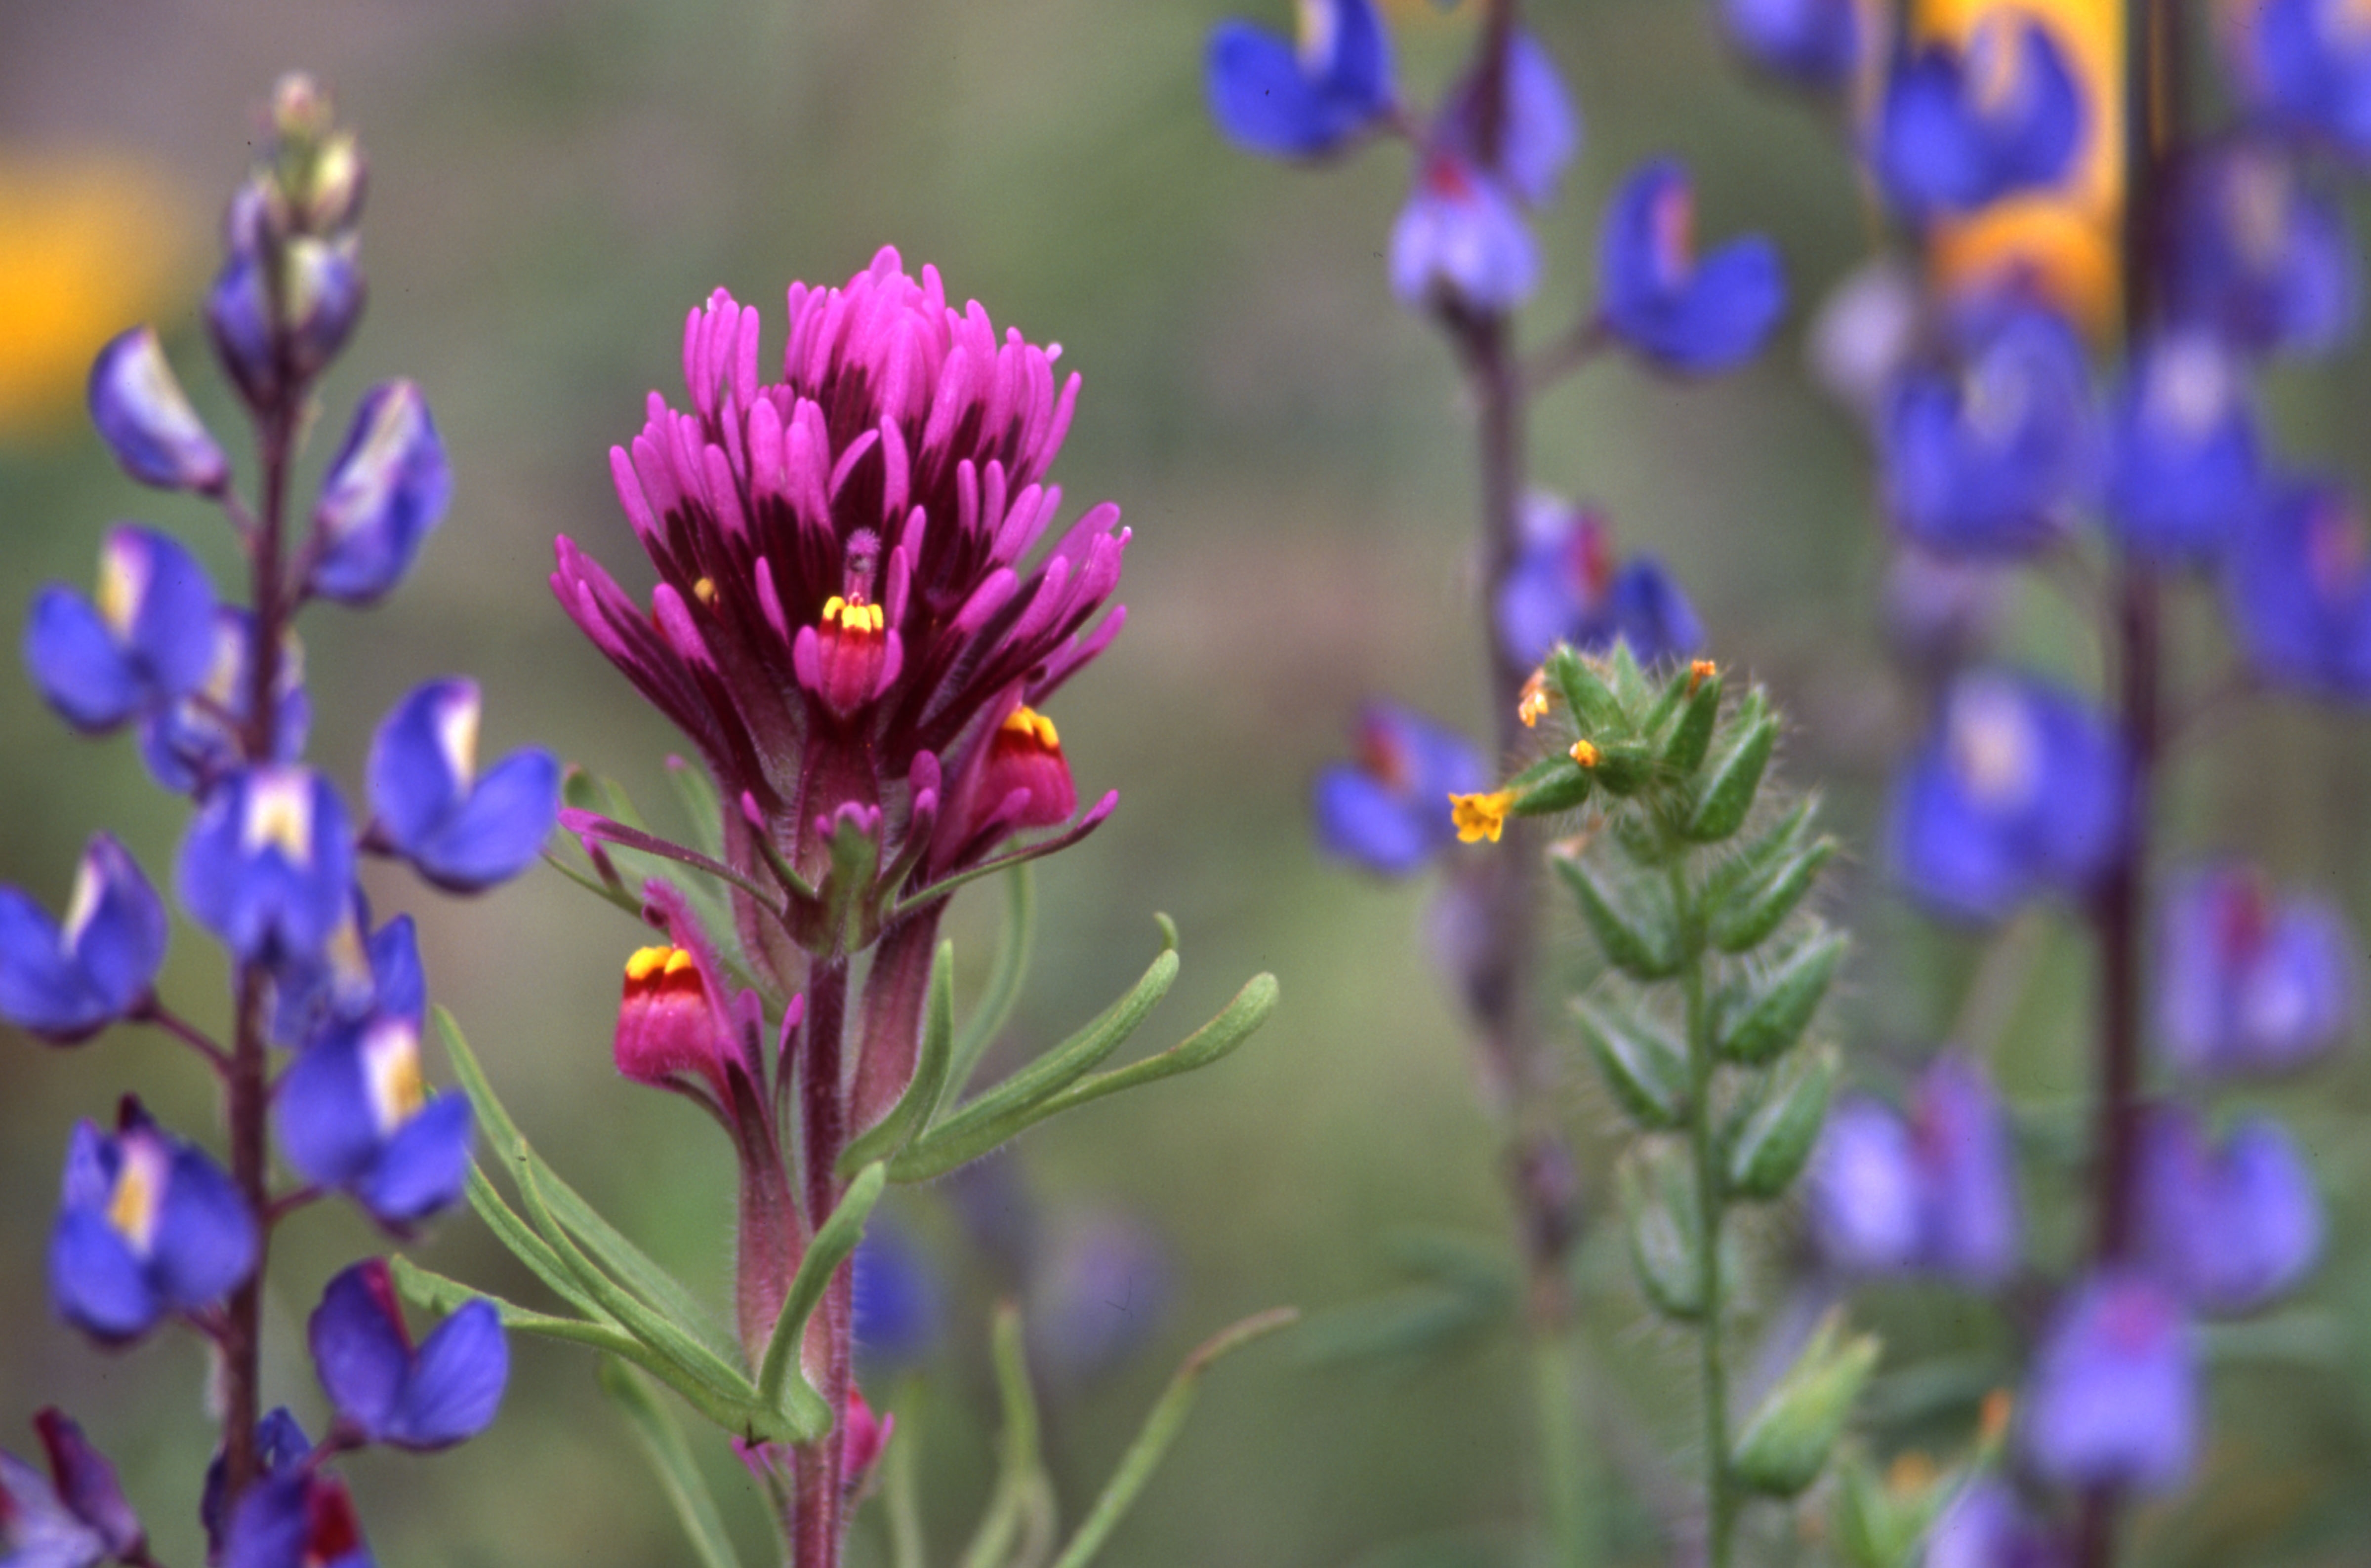 Lupine and owl clover. Photo by Mark Miller.